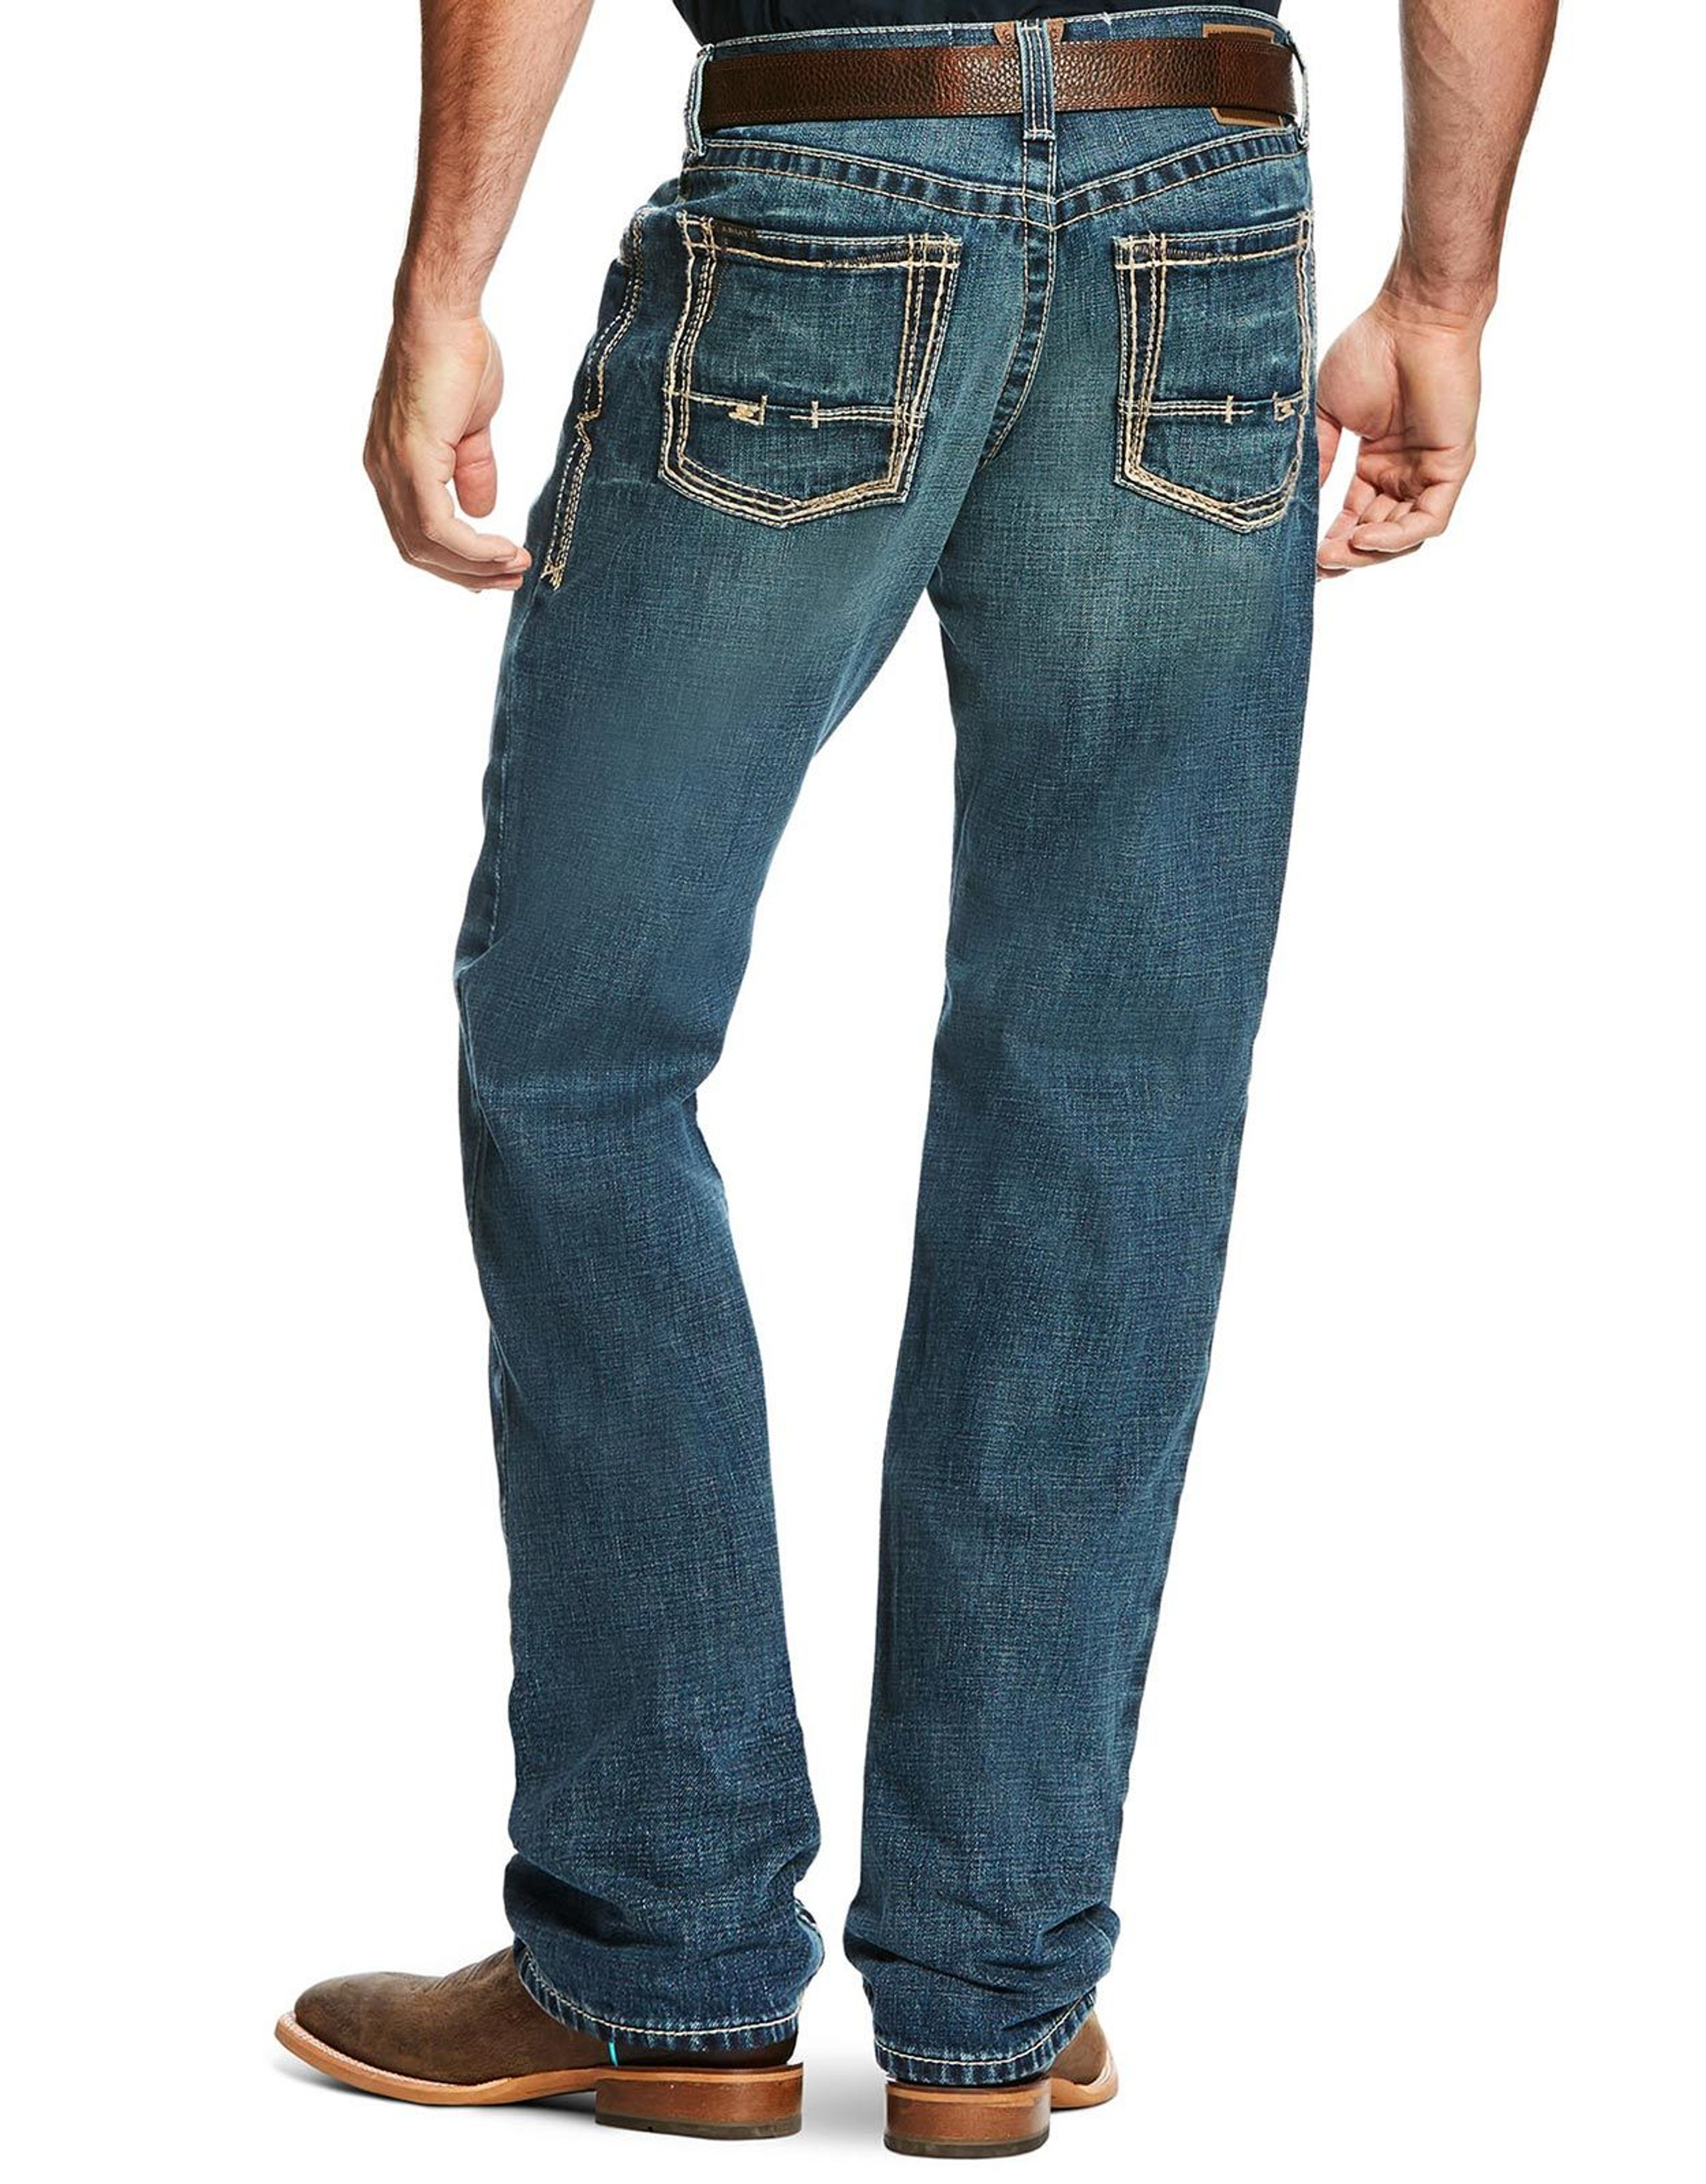 Ariat M3 Loose Fit Jeans for Men from Langston's - Gulch